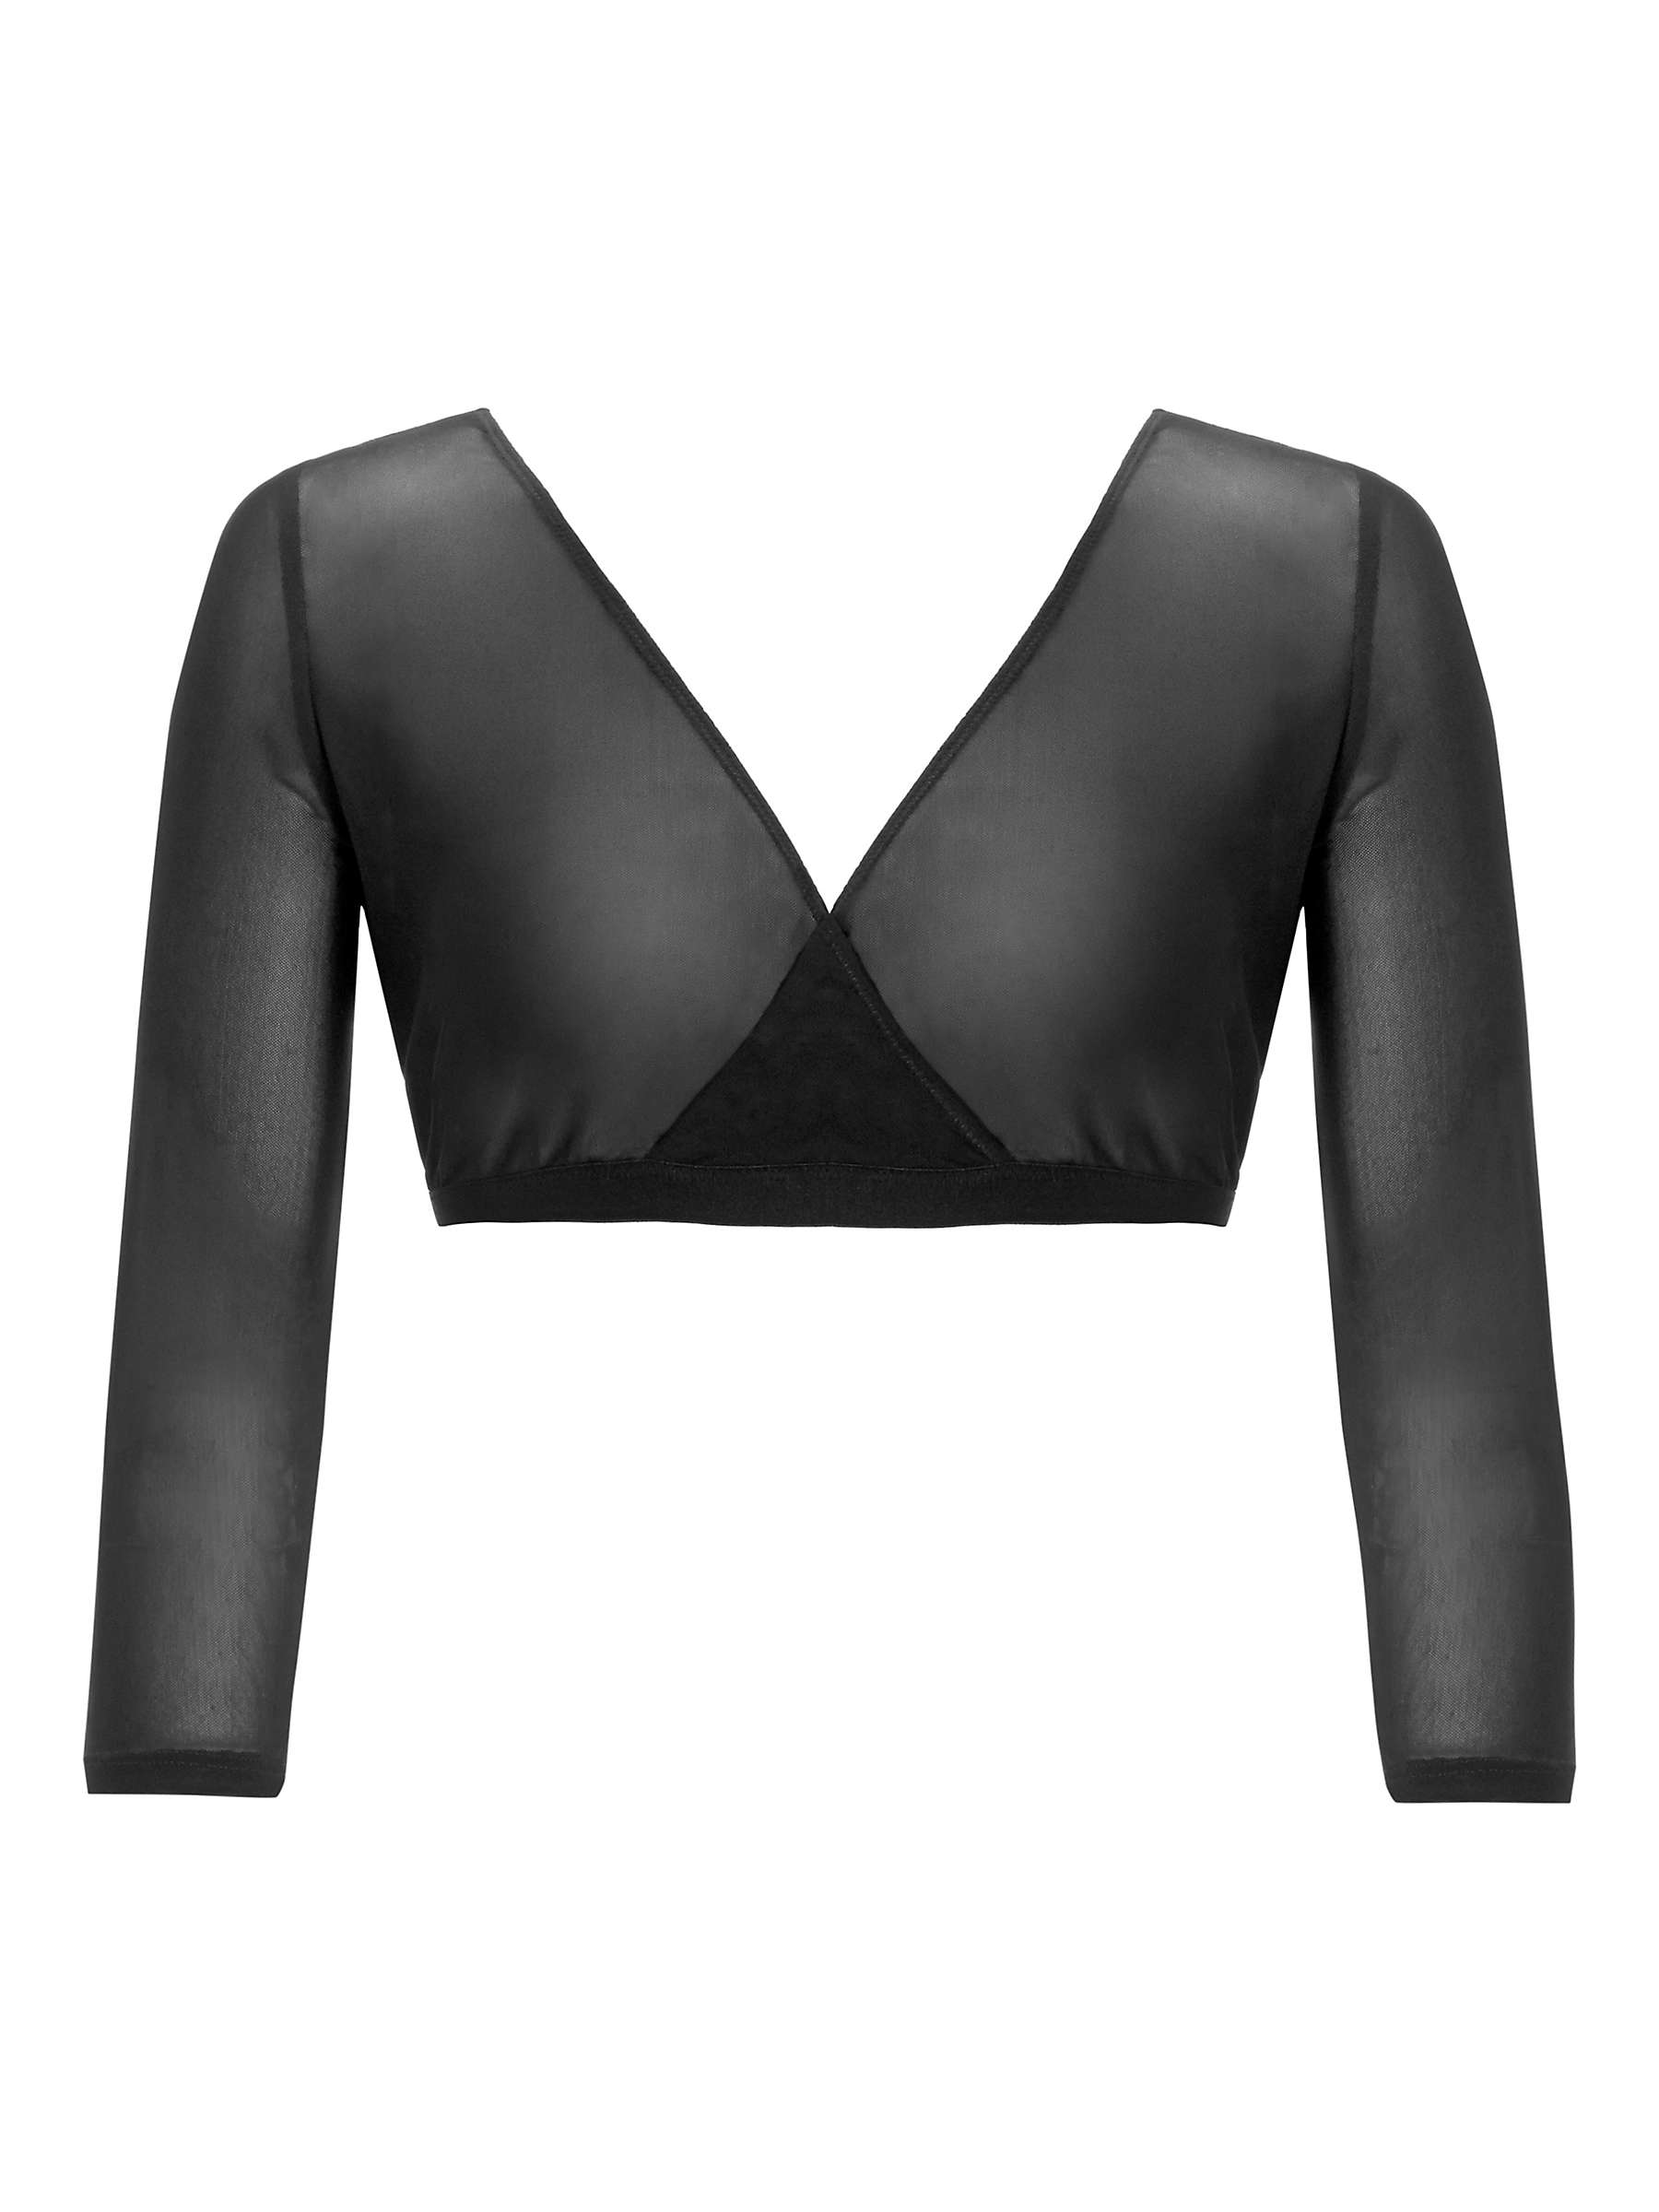 Buy Gina Bacconi Mesh Long Sleeve Under Top Online at johnlewis.com